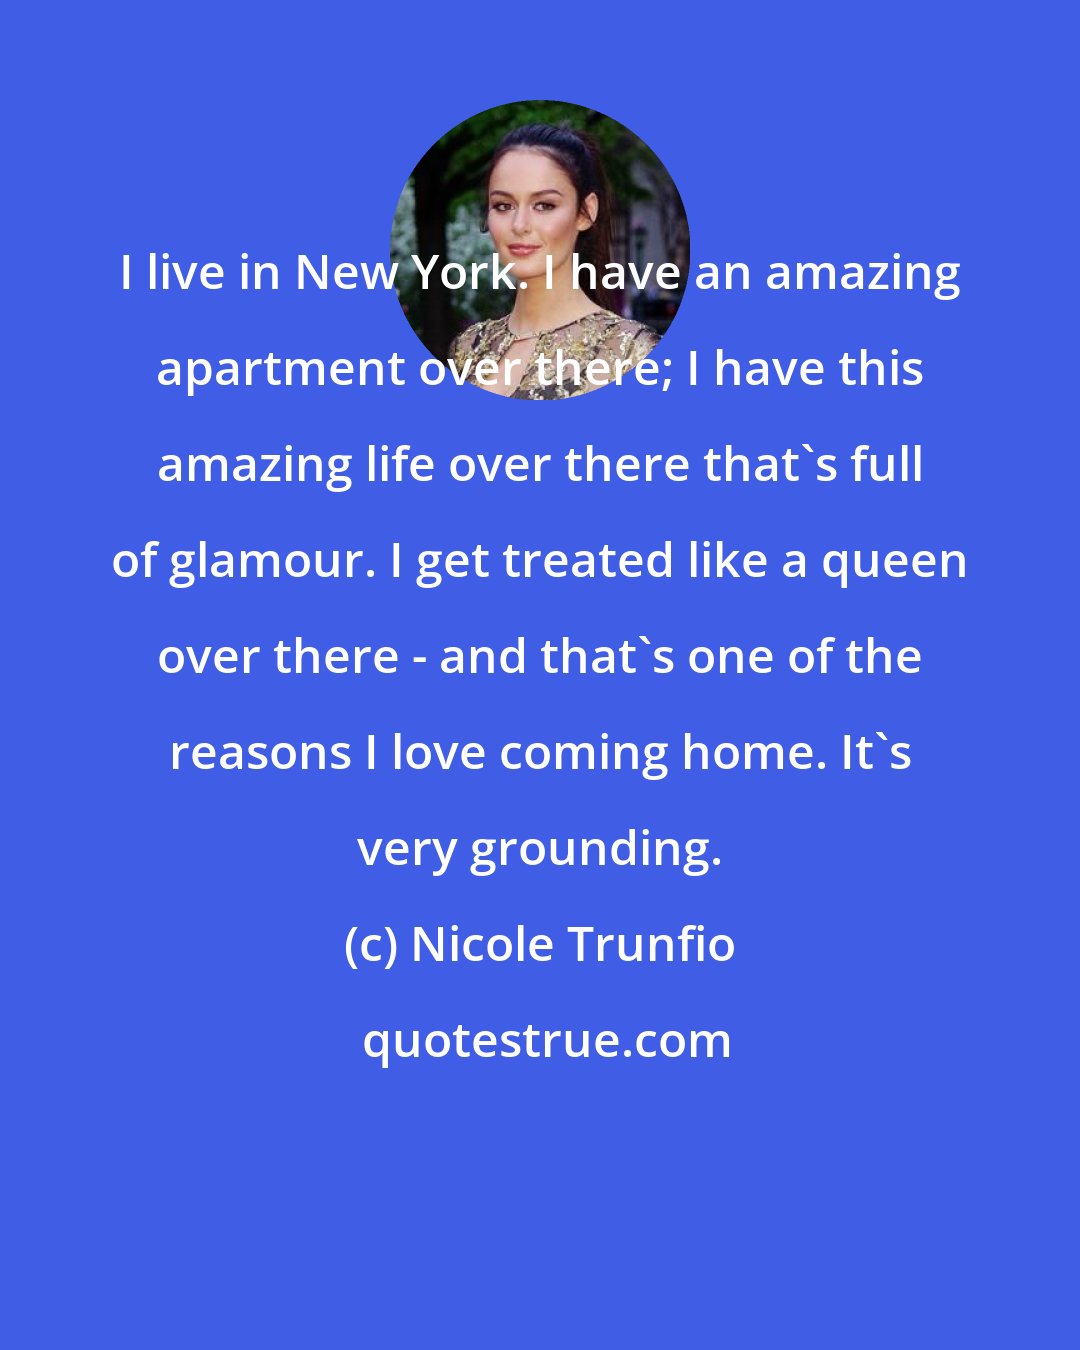 Nicole Trunfio: I live in New York. I have an amazing apartment over there; I have this amazing life over there that's full of glamour. I get treated like a queen over there - and that's one of the reasons I love coming home. It's very grounding.